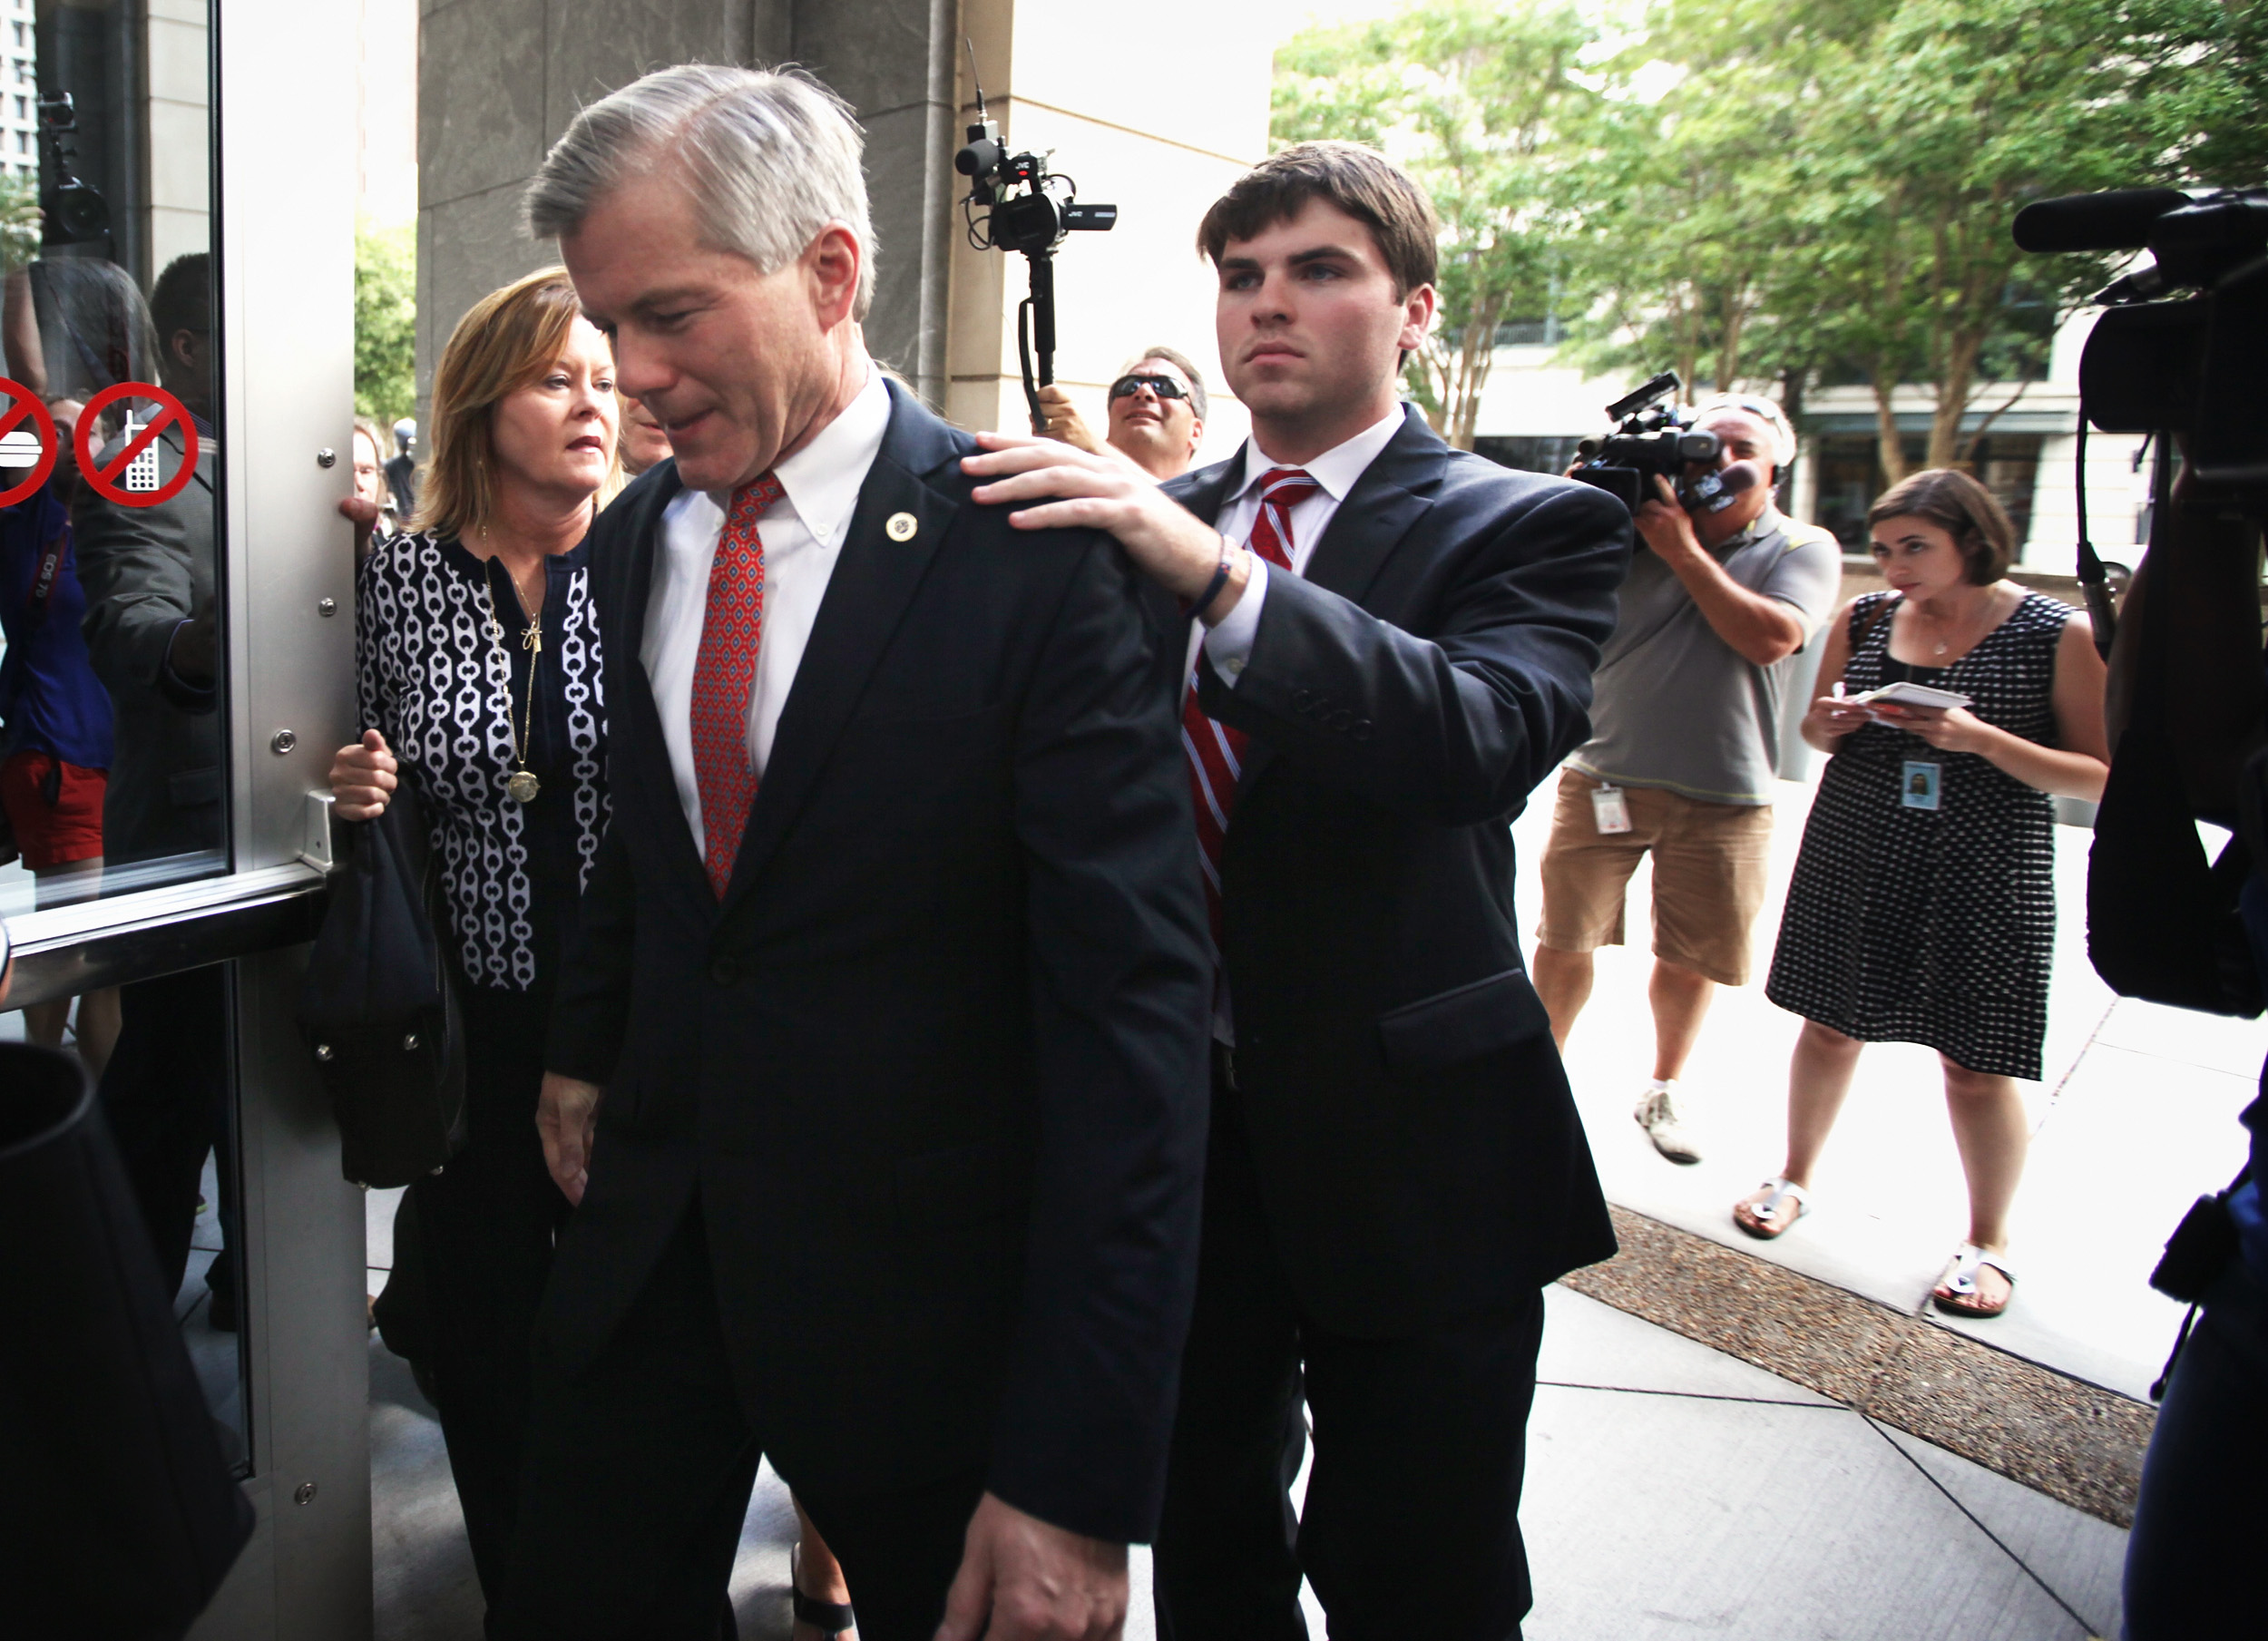 McDonnell juror: ‘I was trying not to cry’